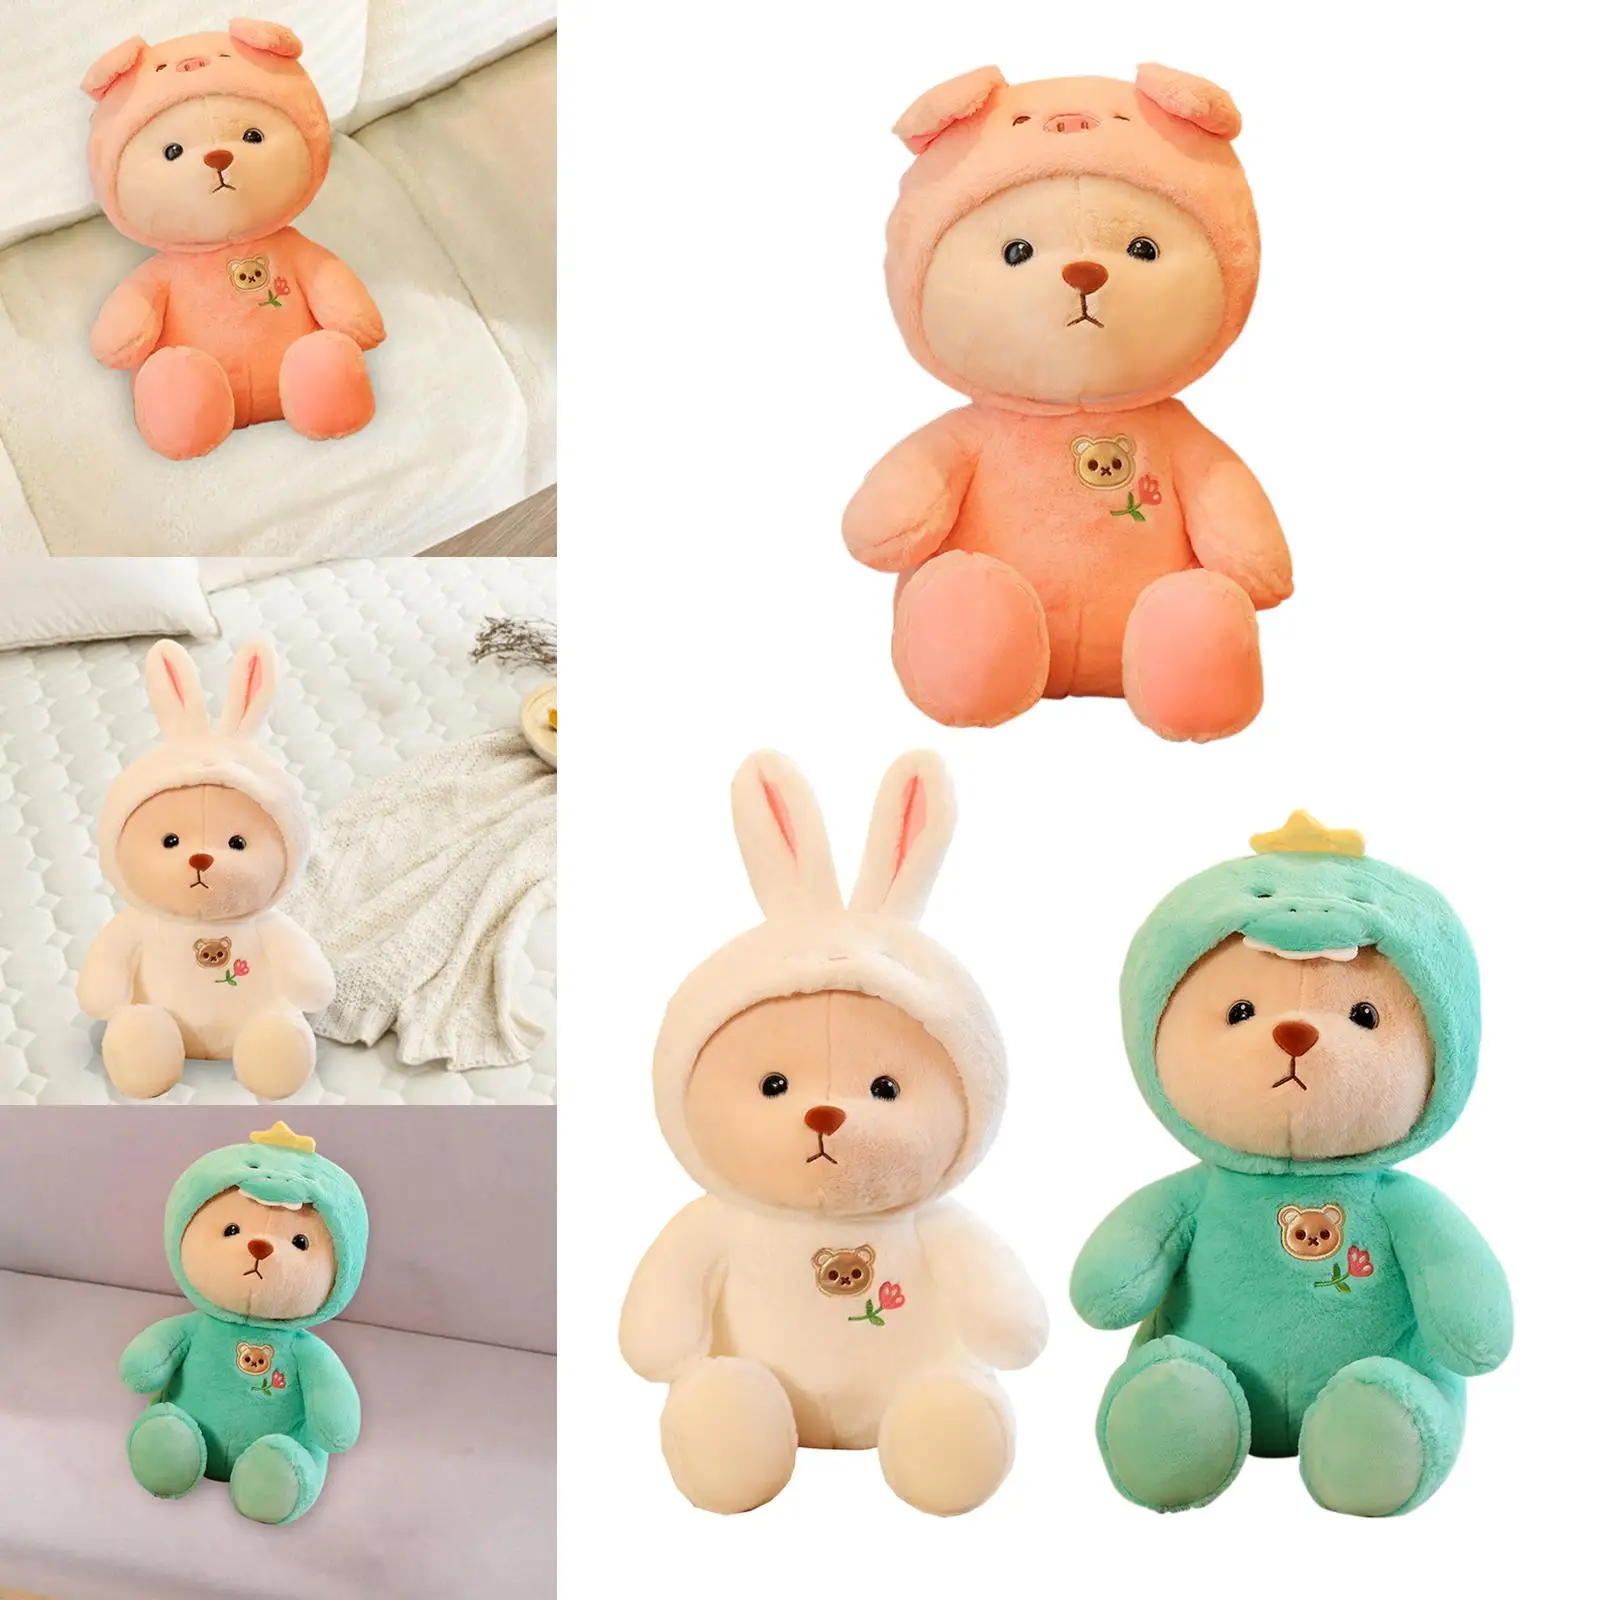 Cute Animal Plush Toys Birthday Gifts Soft Pillow for Adults Boys Girls Kids